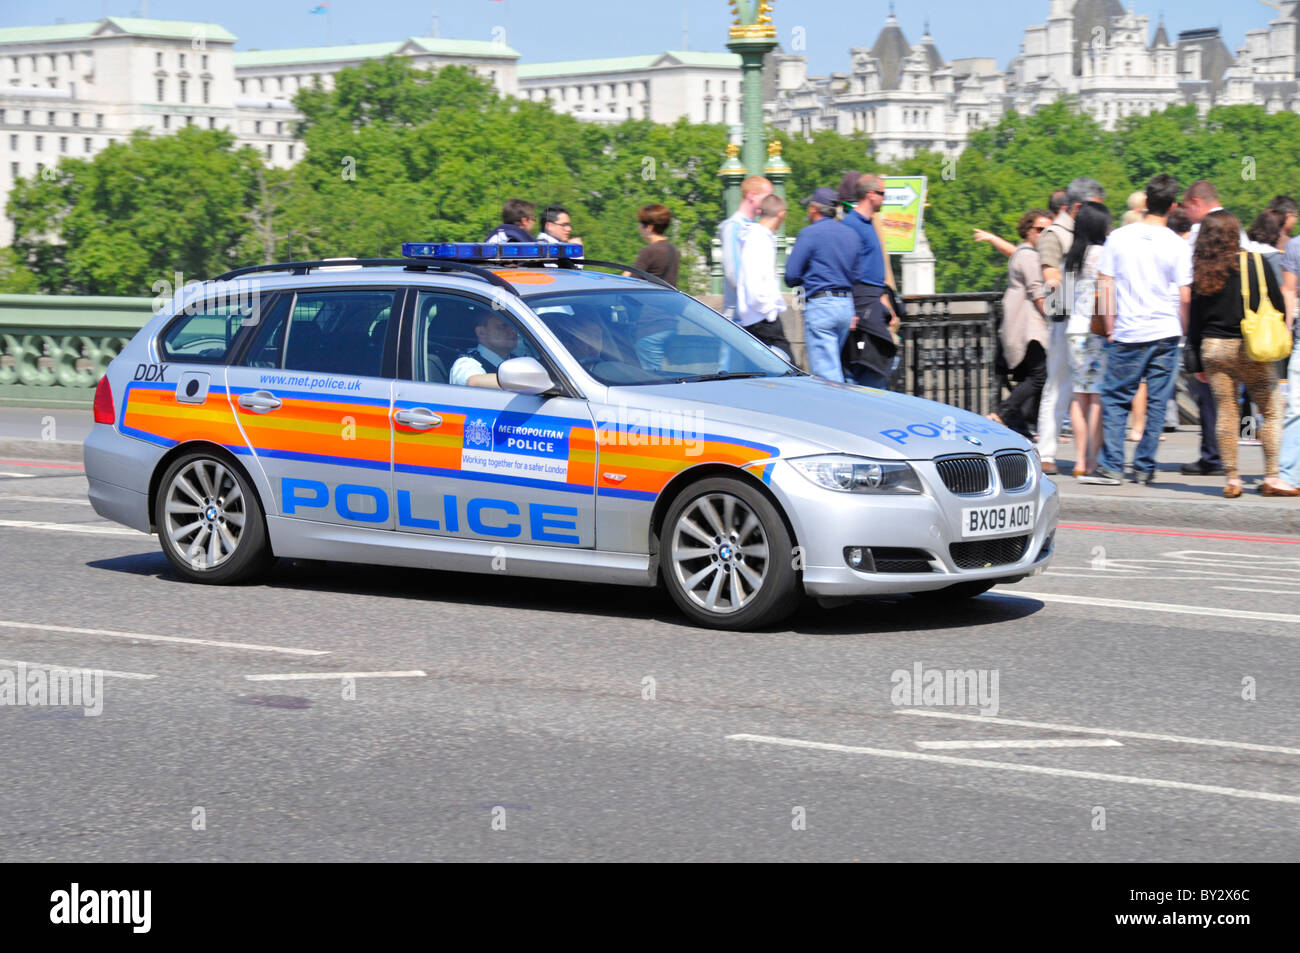 Street scene uniformed officers in Metropolitan Police patrol car driving across Westminster Bridge with group of tourists beyond London England UK Stock Photo